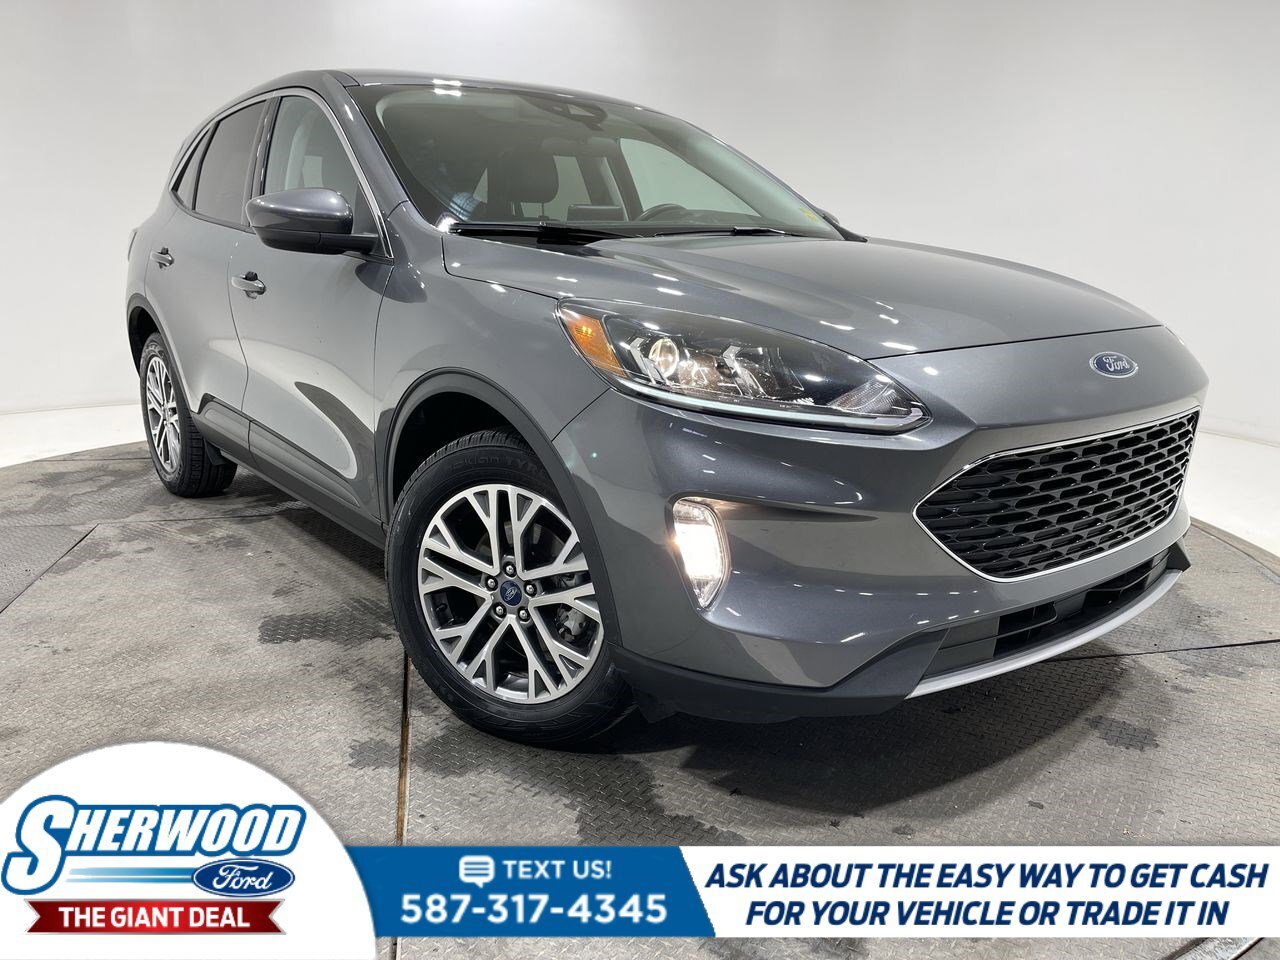 2022 Ford Escape SEL AWD $0 Down $118 Weekly - CLEAN CARFAX